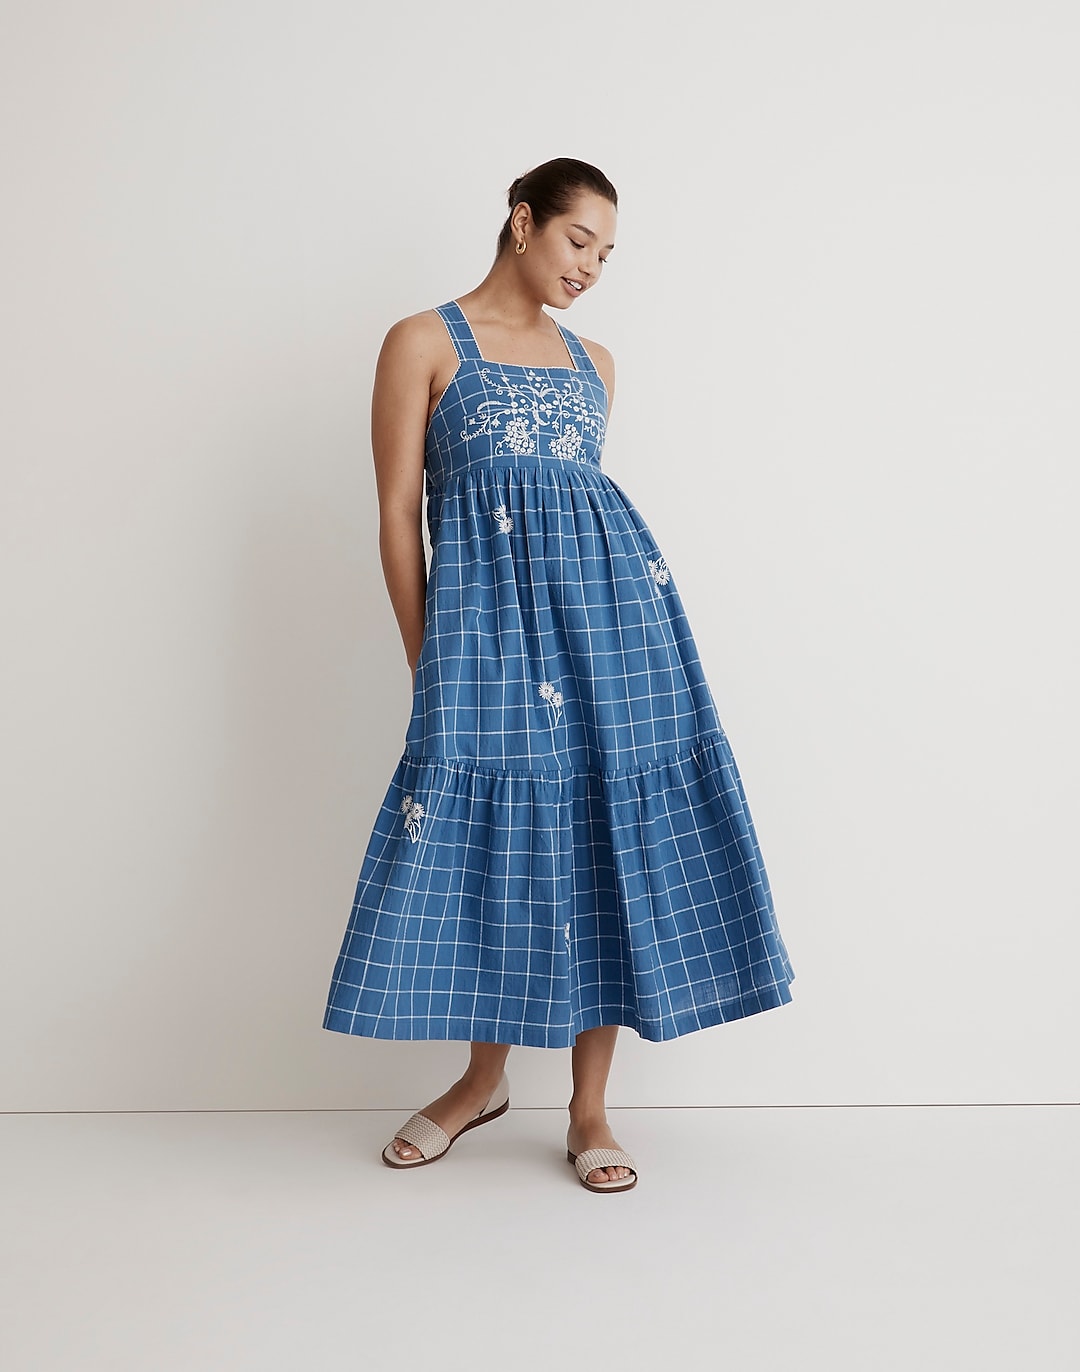 Embroidered Cicely Tiered Midi Dress in Plaid | Madewell